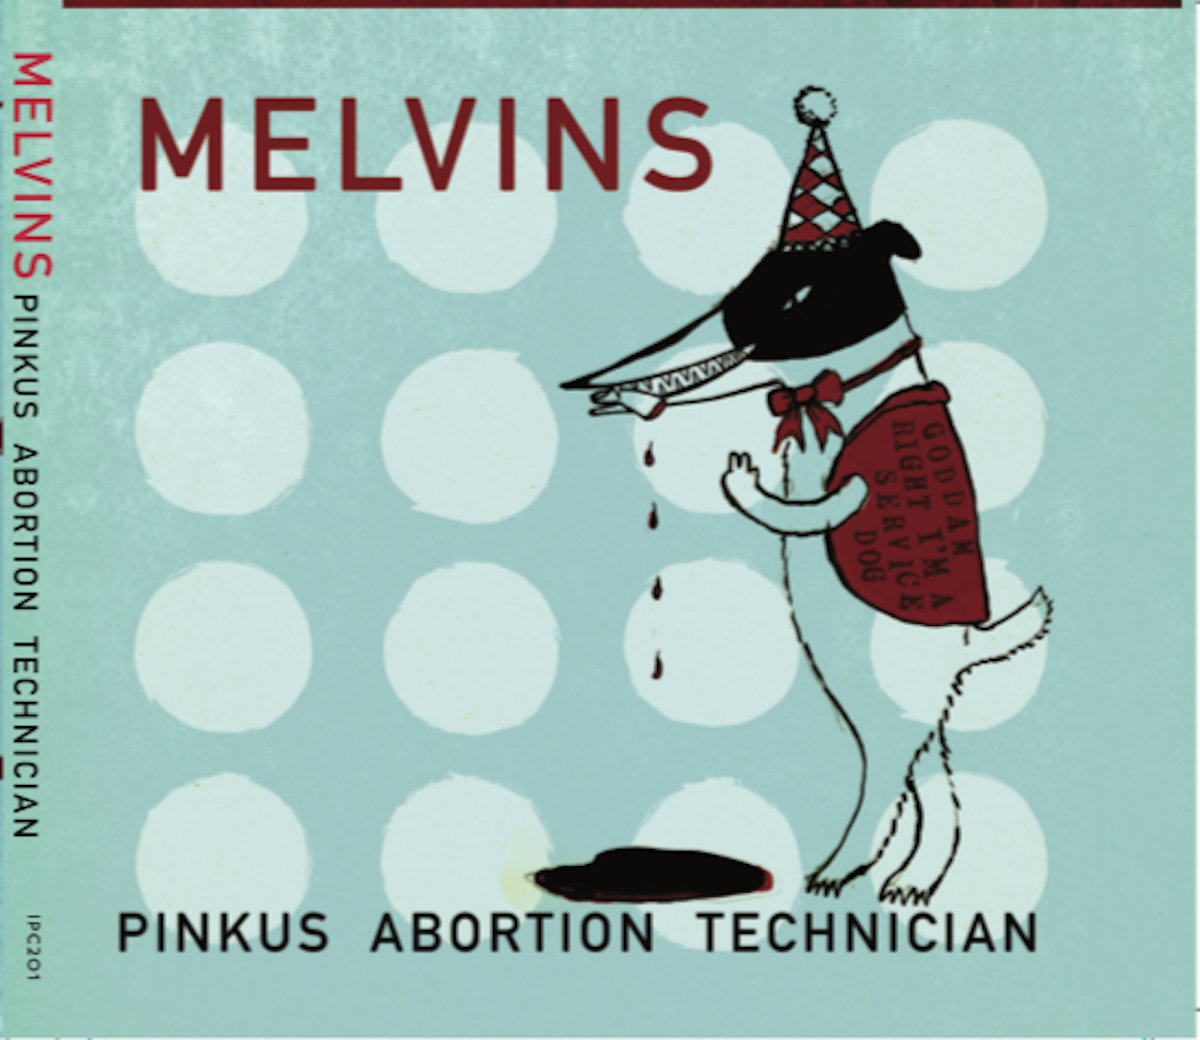 ALBUM REVIEW: The Melvin’s ‘Pinkus Abortion Technician’ keeps band walking a non-conventional path